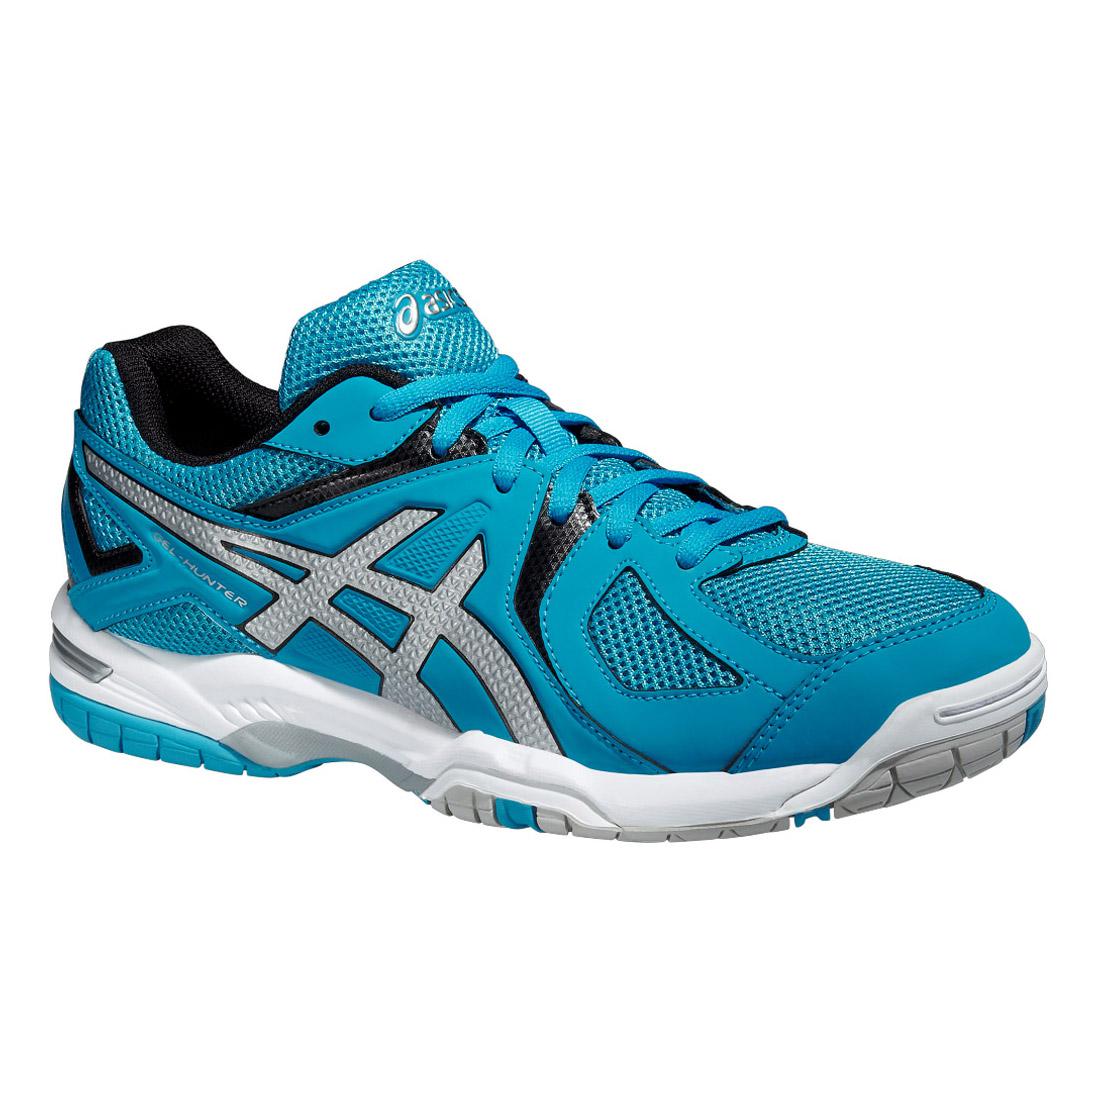 Asics Womens GEL-Hunter 3 Indoor Court Shoes - Turquoise/Silver/Black -  